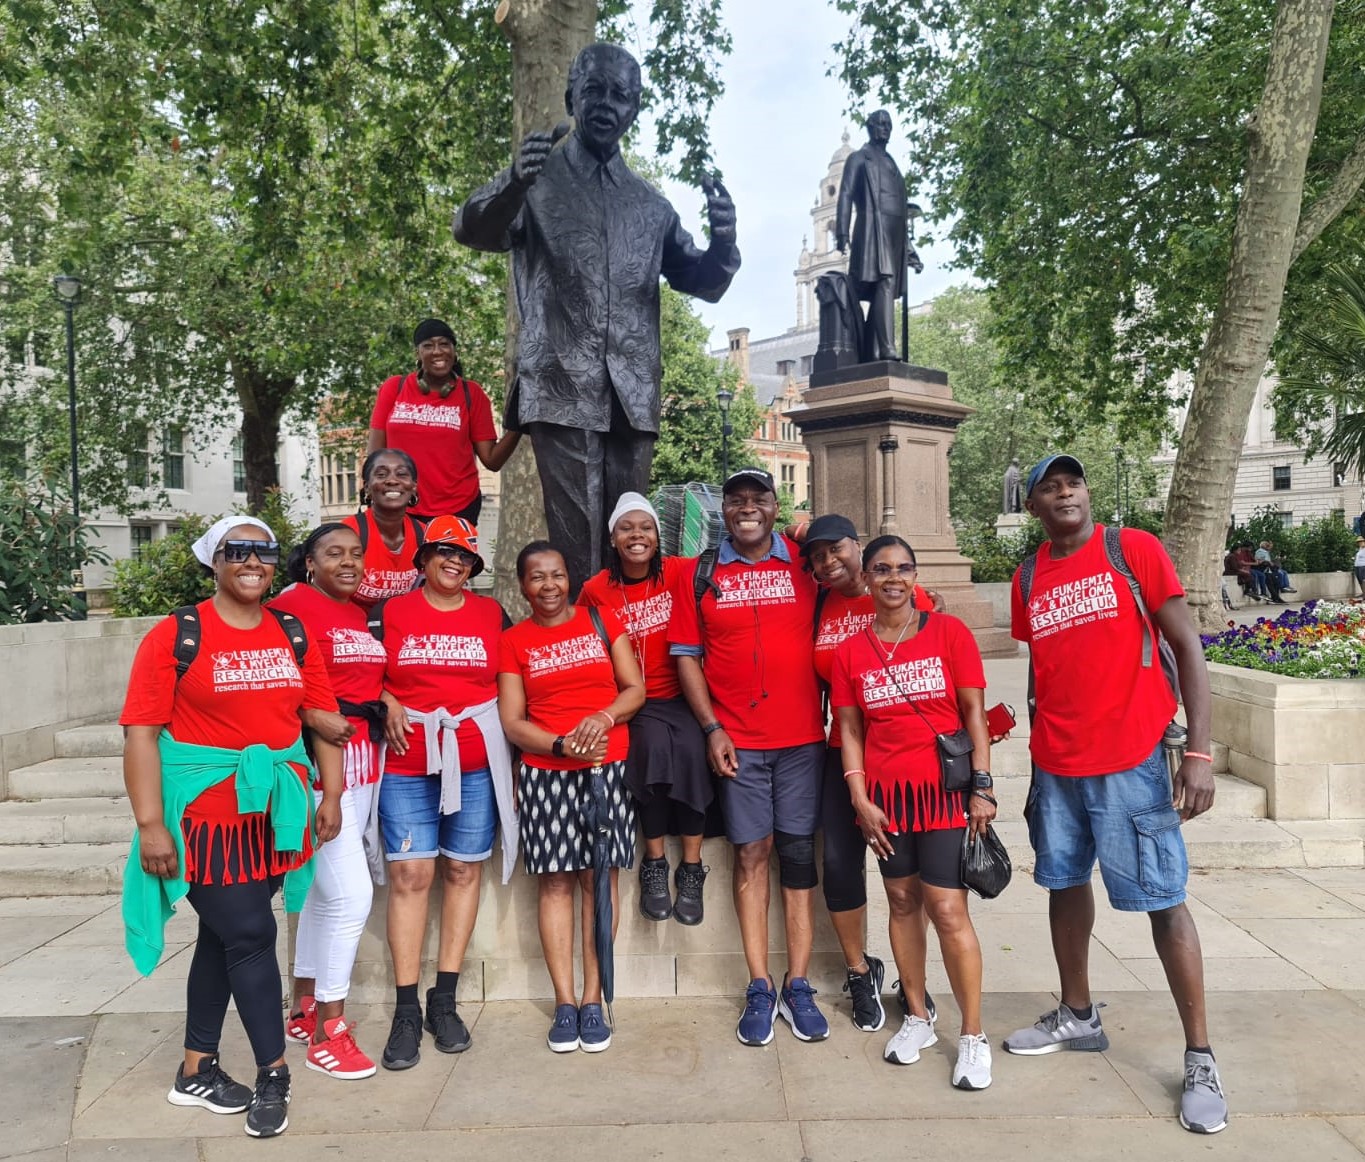 The Kiwanis take to the streets of London for a myeloma march